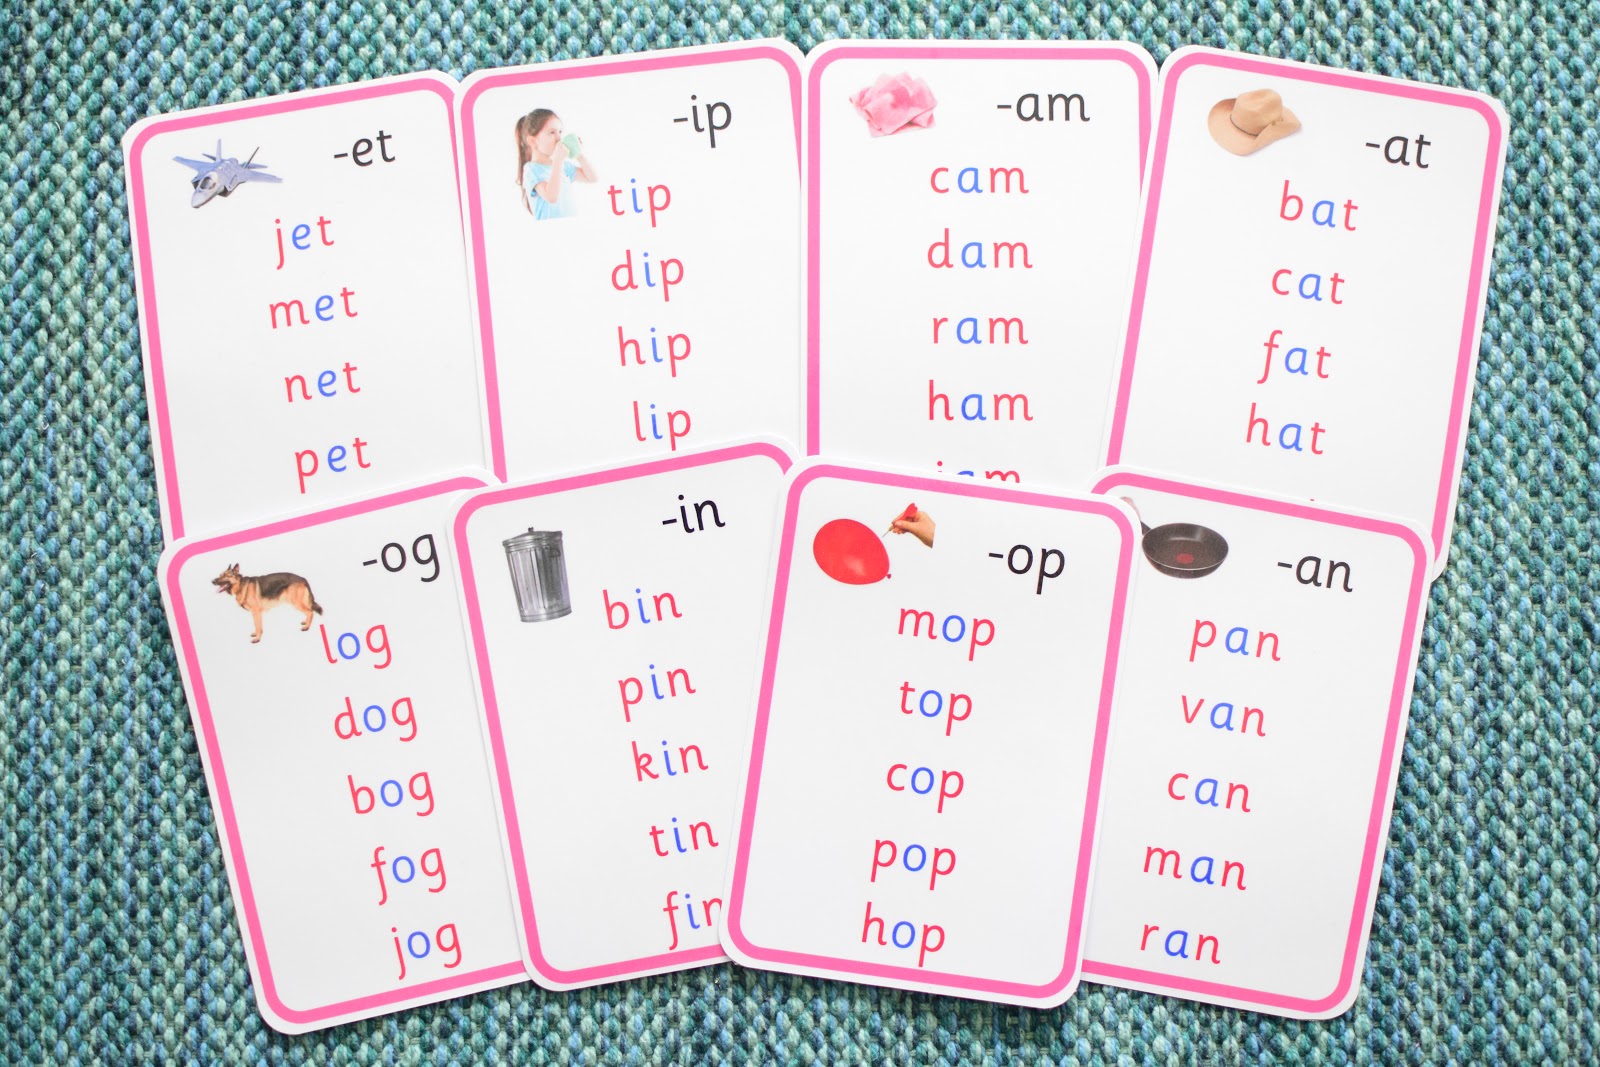 42 lists of 5 words each The Pink Series Word Lists Montessori 